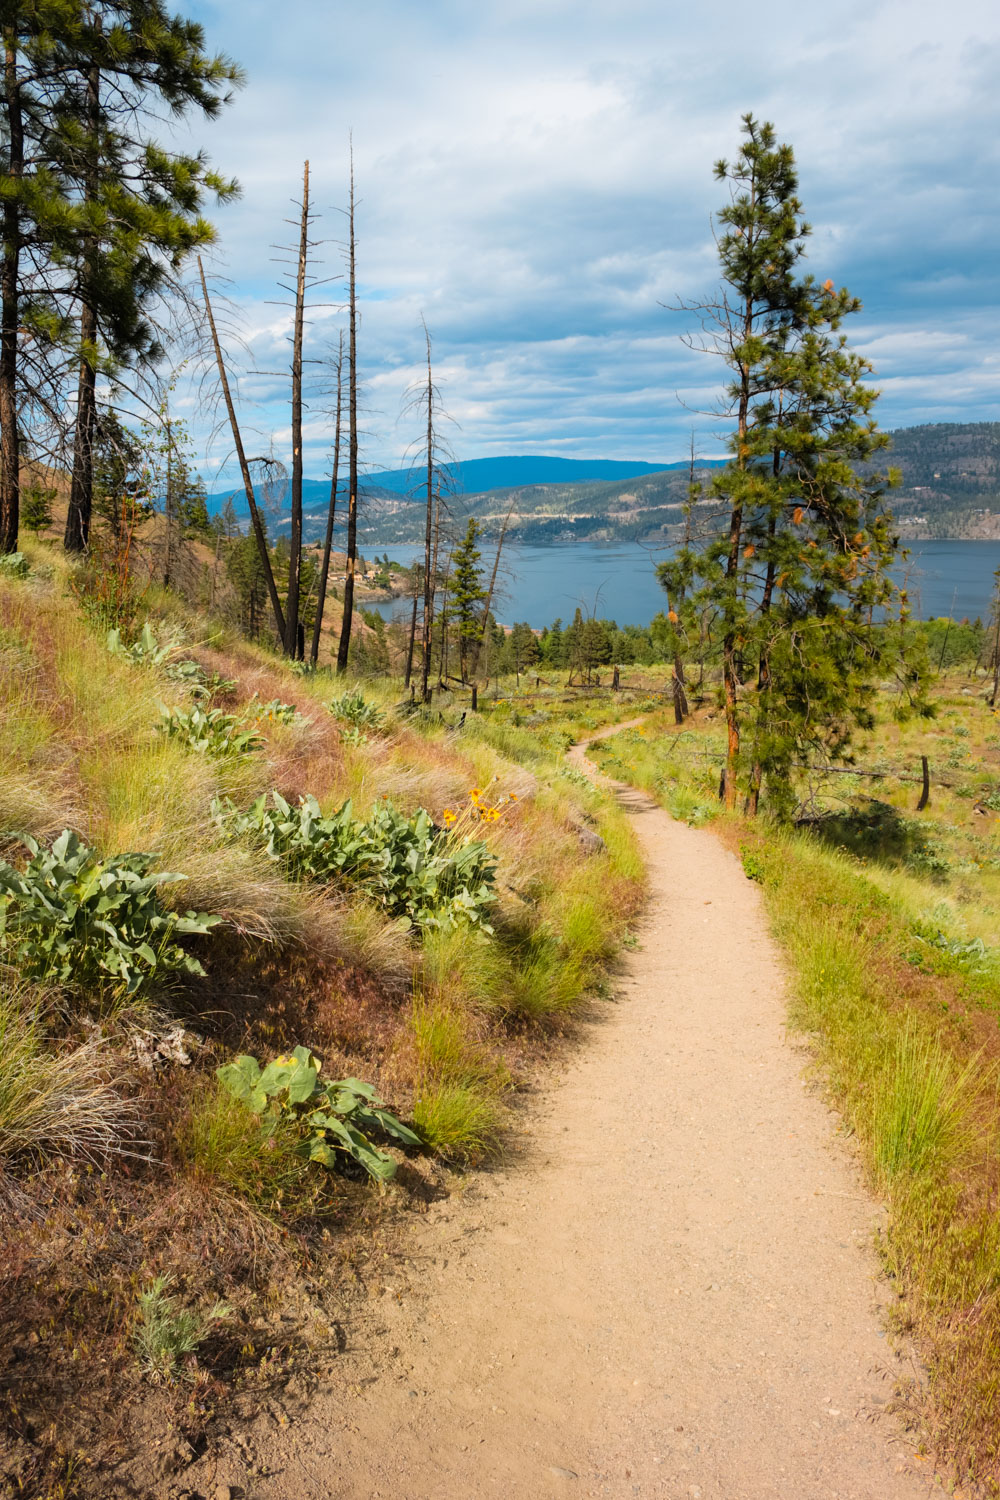 Hiking trail through a forest damaged by a wildfire at Bear Creek Provincial Park with a blue Okanagan Lake in the background.